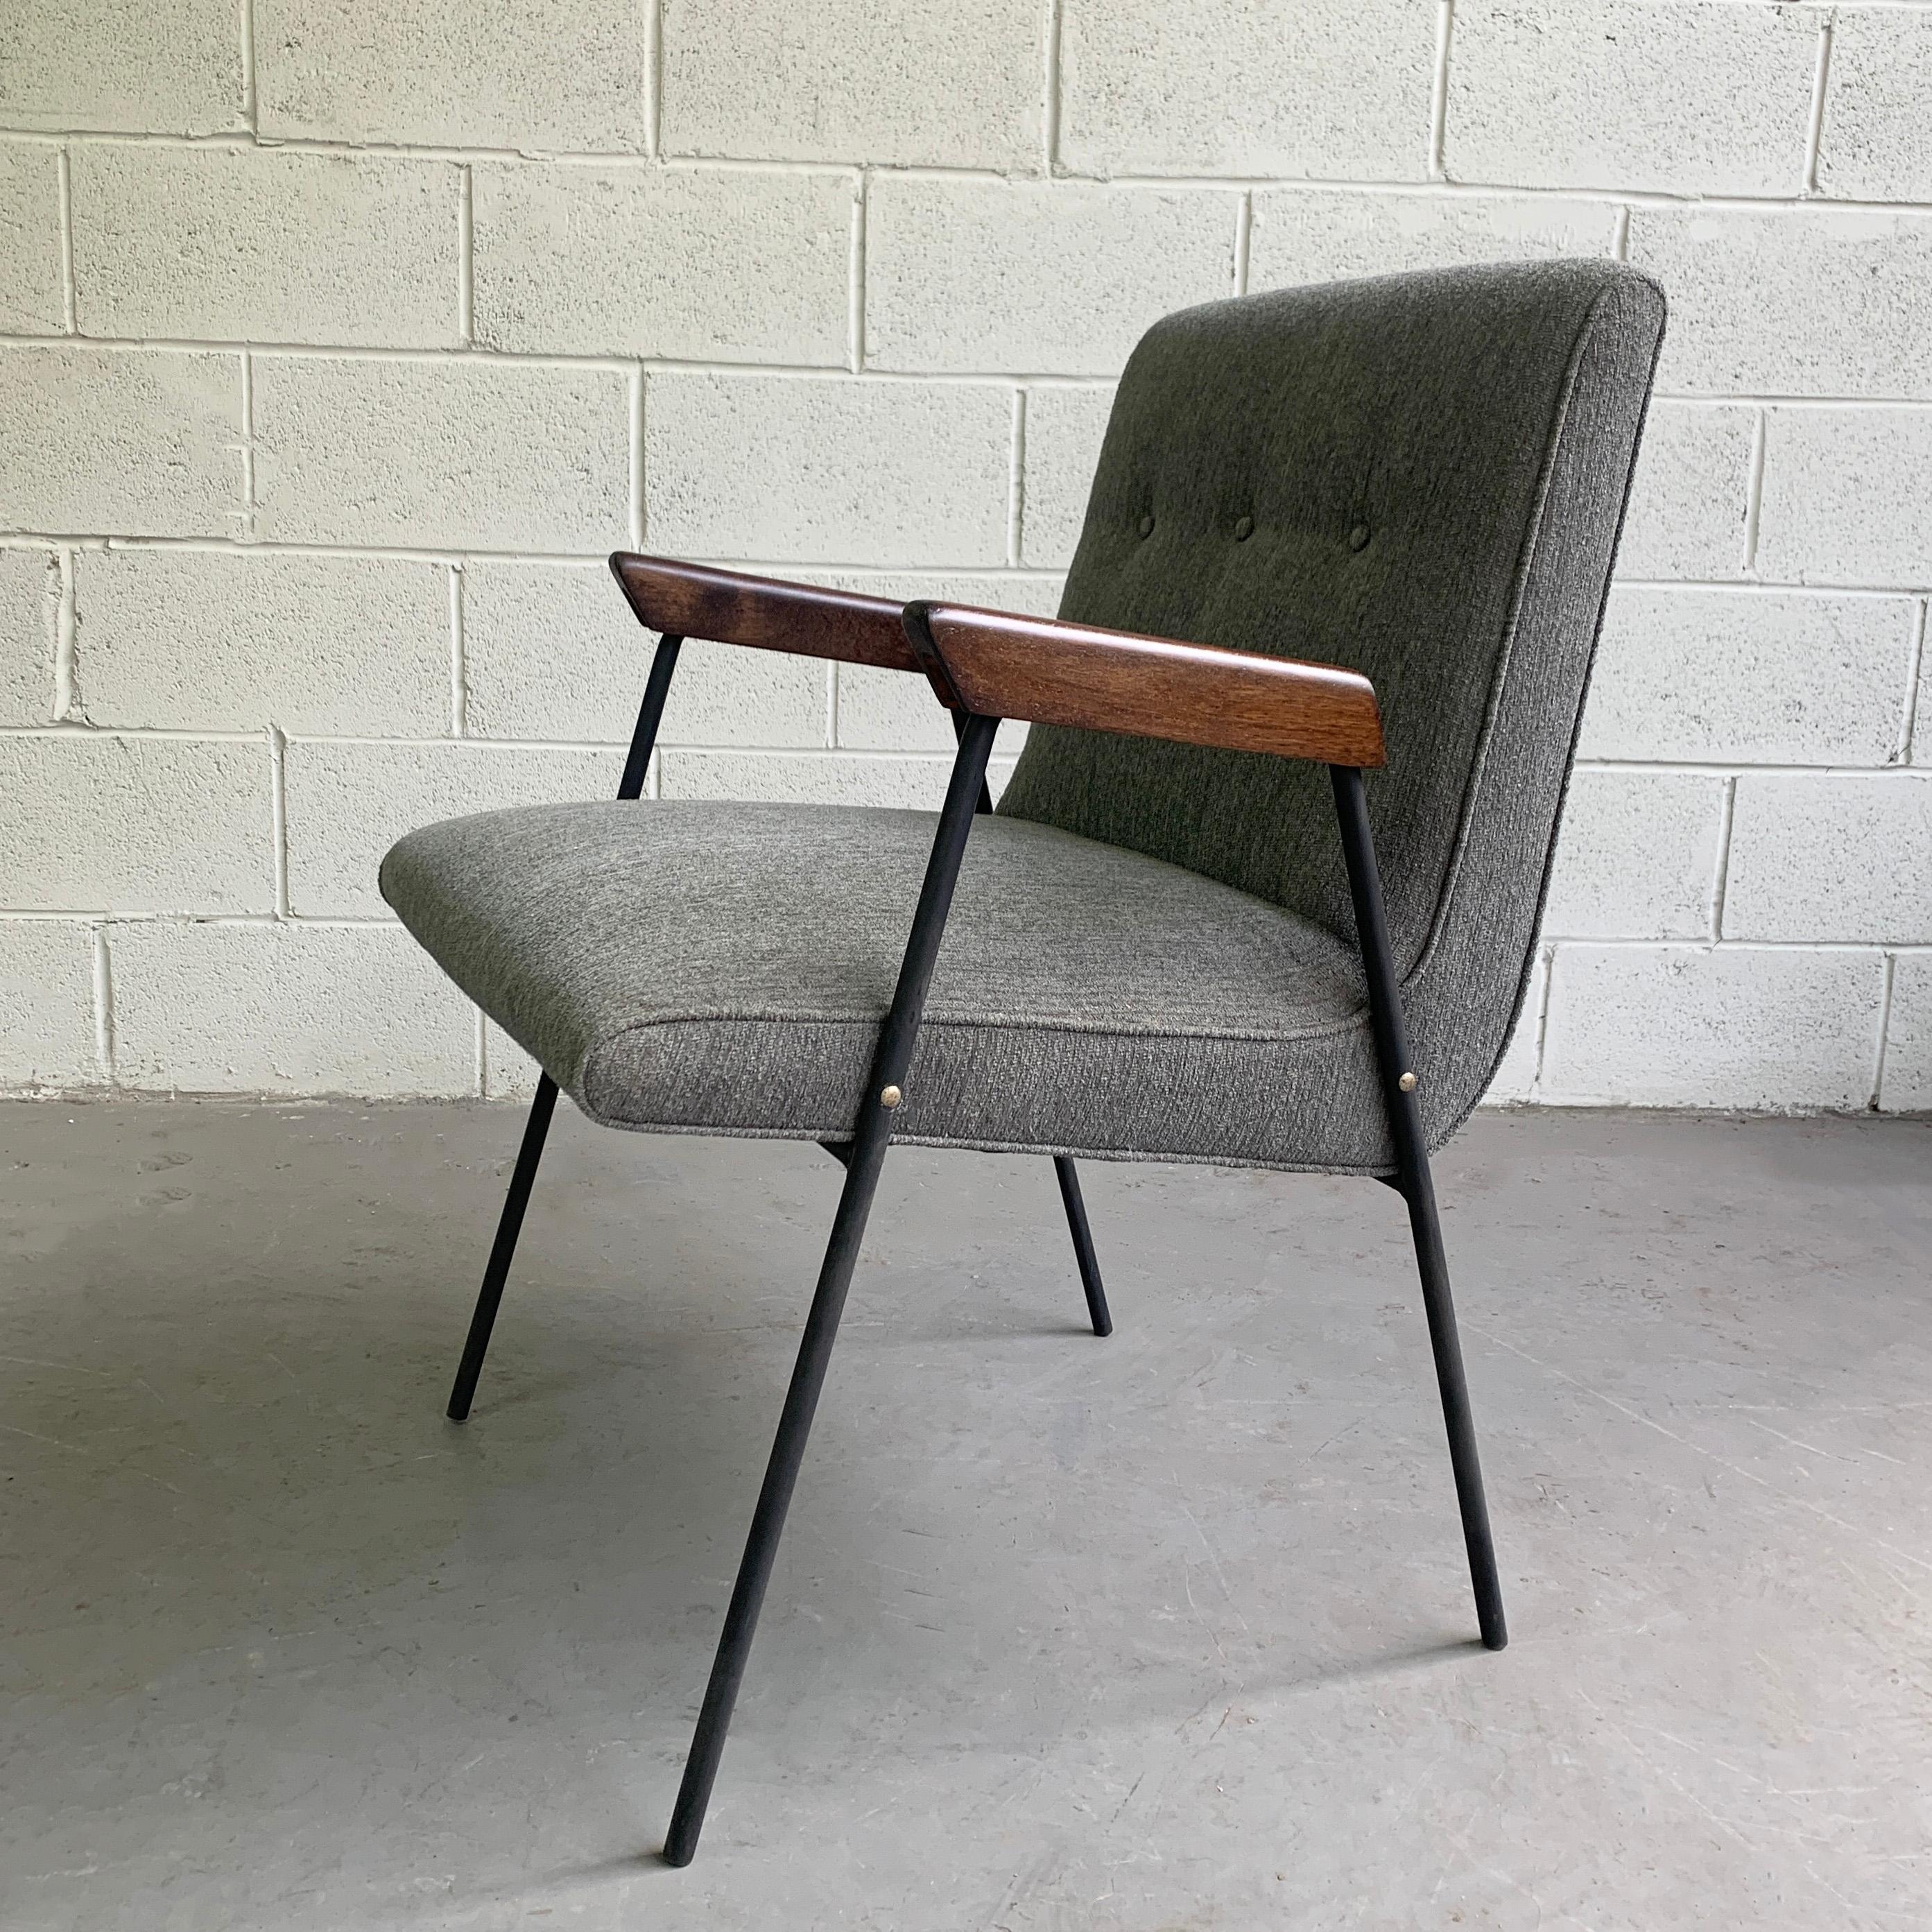 American Wrought Iron Upholstered Armchair Attributed to Milo Baughman, Pacific Iron